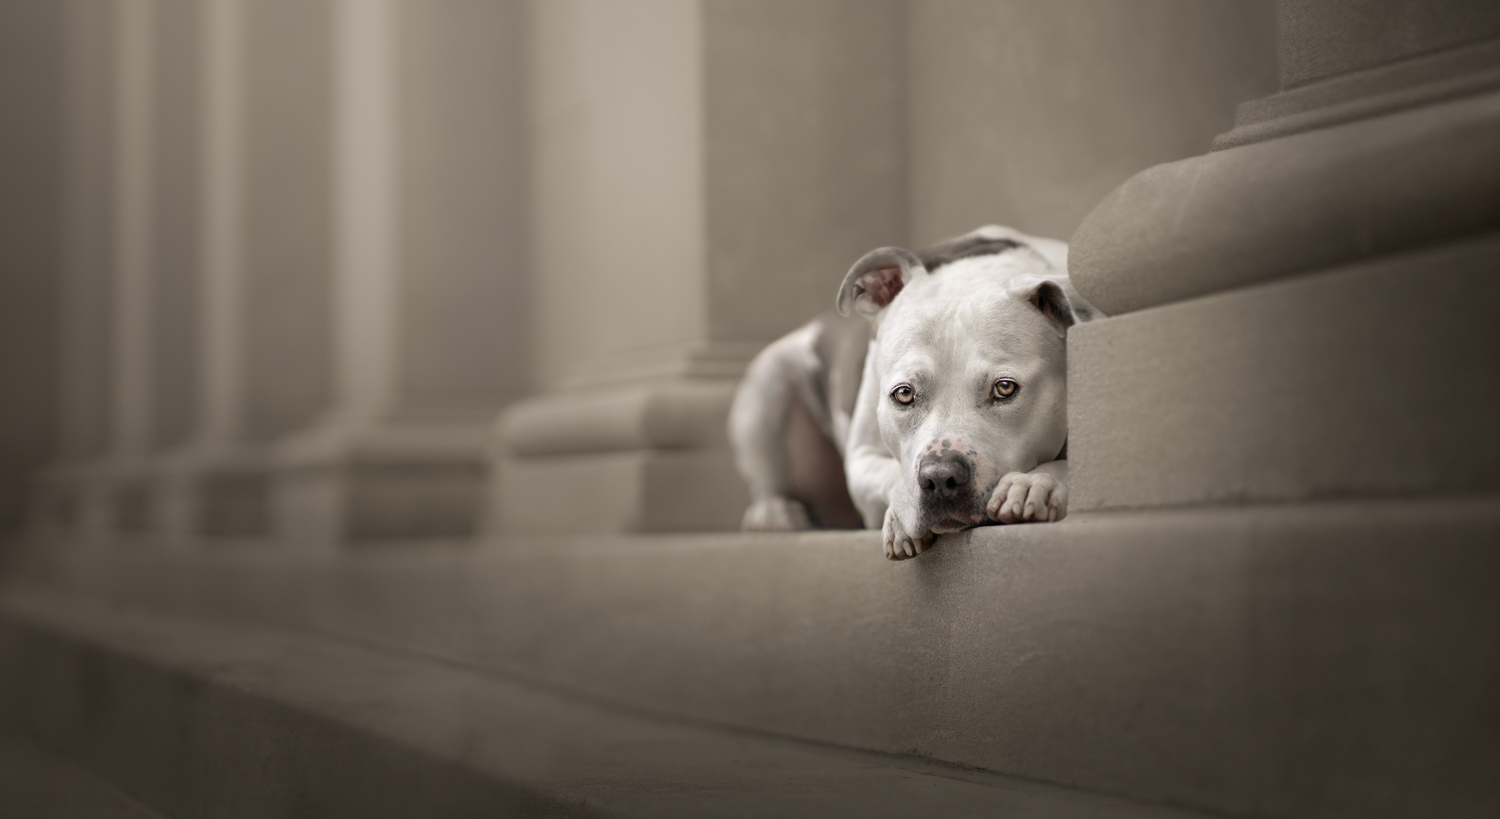 Elegance by Katie Brockman won the Urban Dog PhoTOGrapher of the Year sub-category